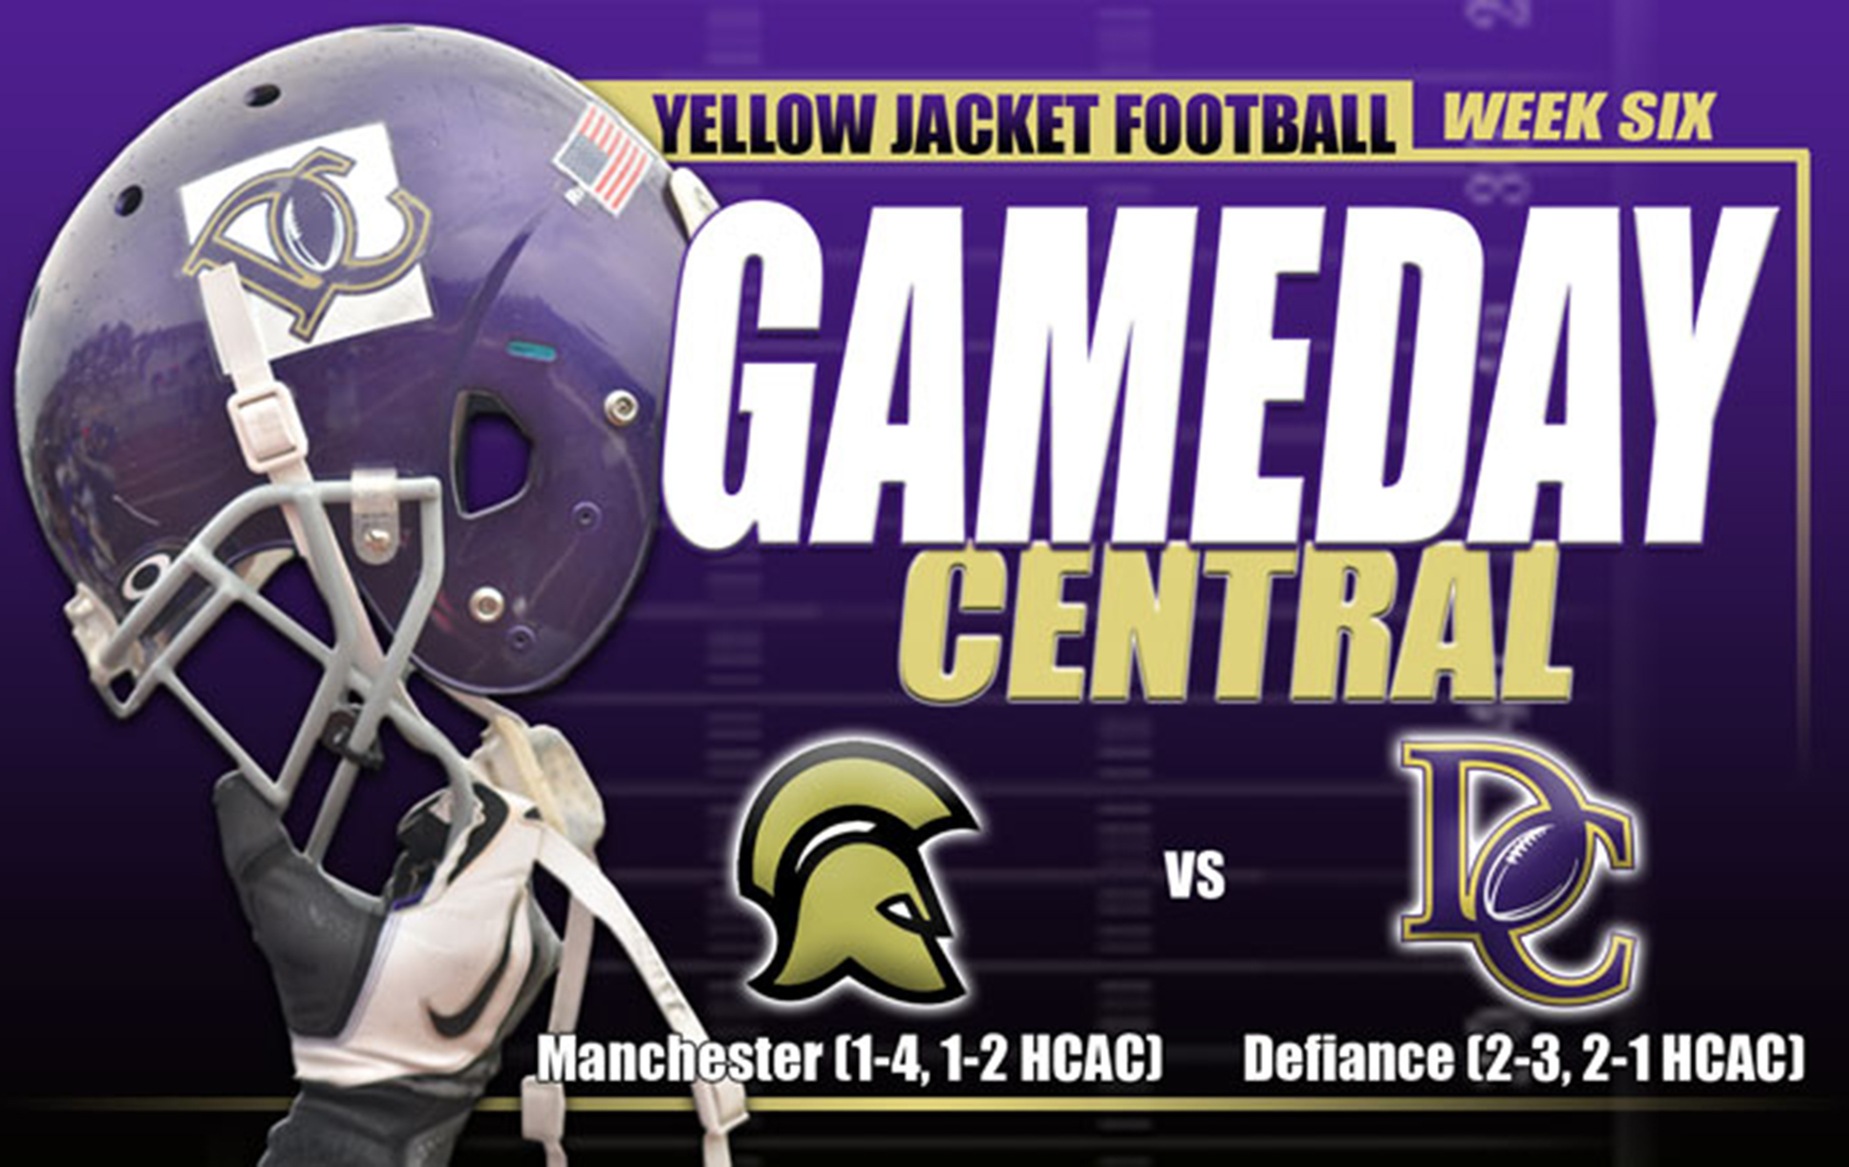 GAMEDAY CENTRAL - Defiance at Manchester - Game Six